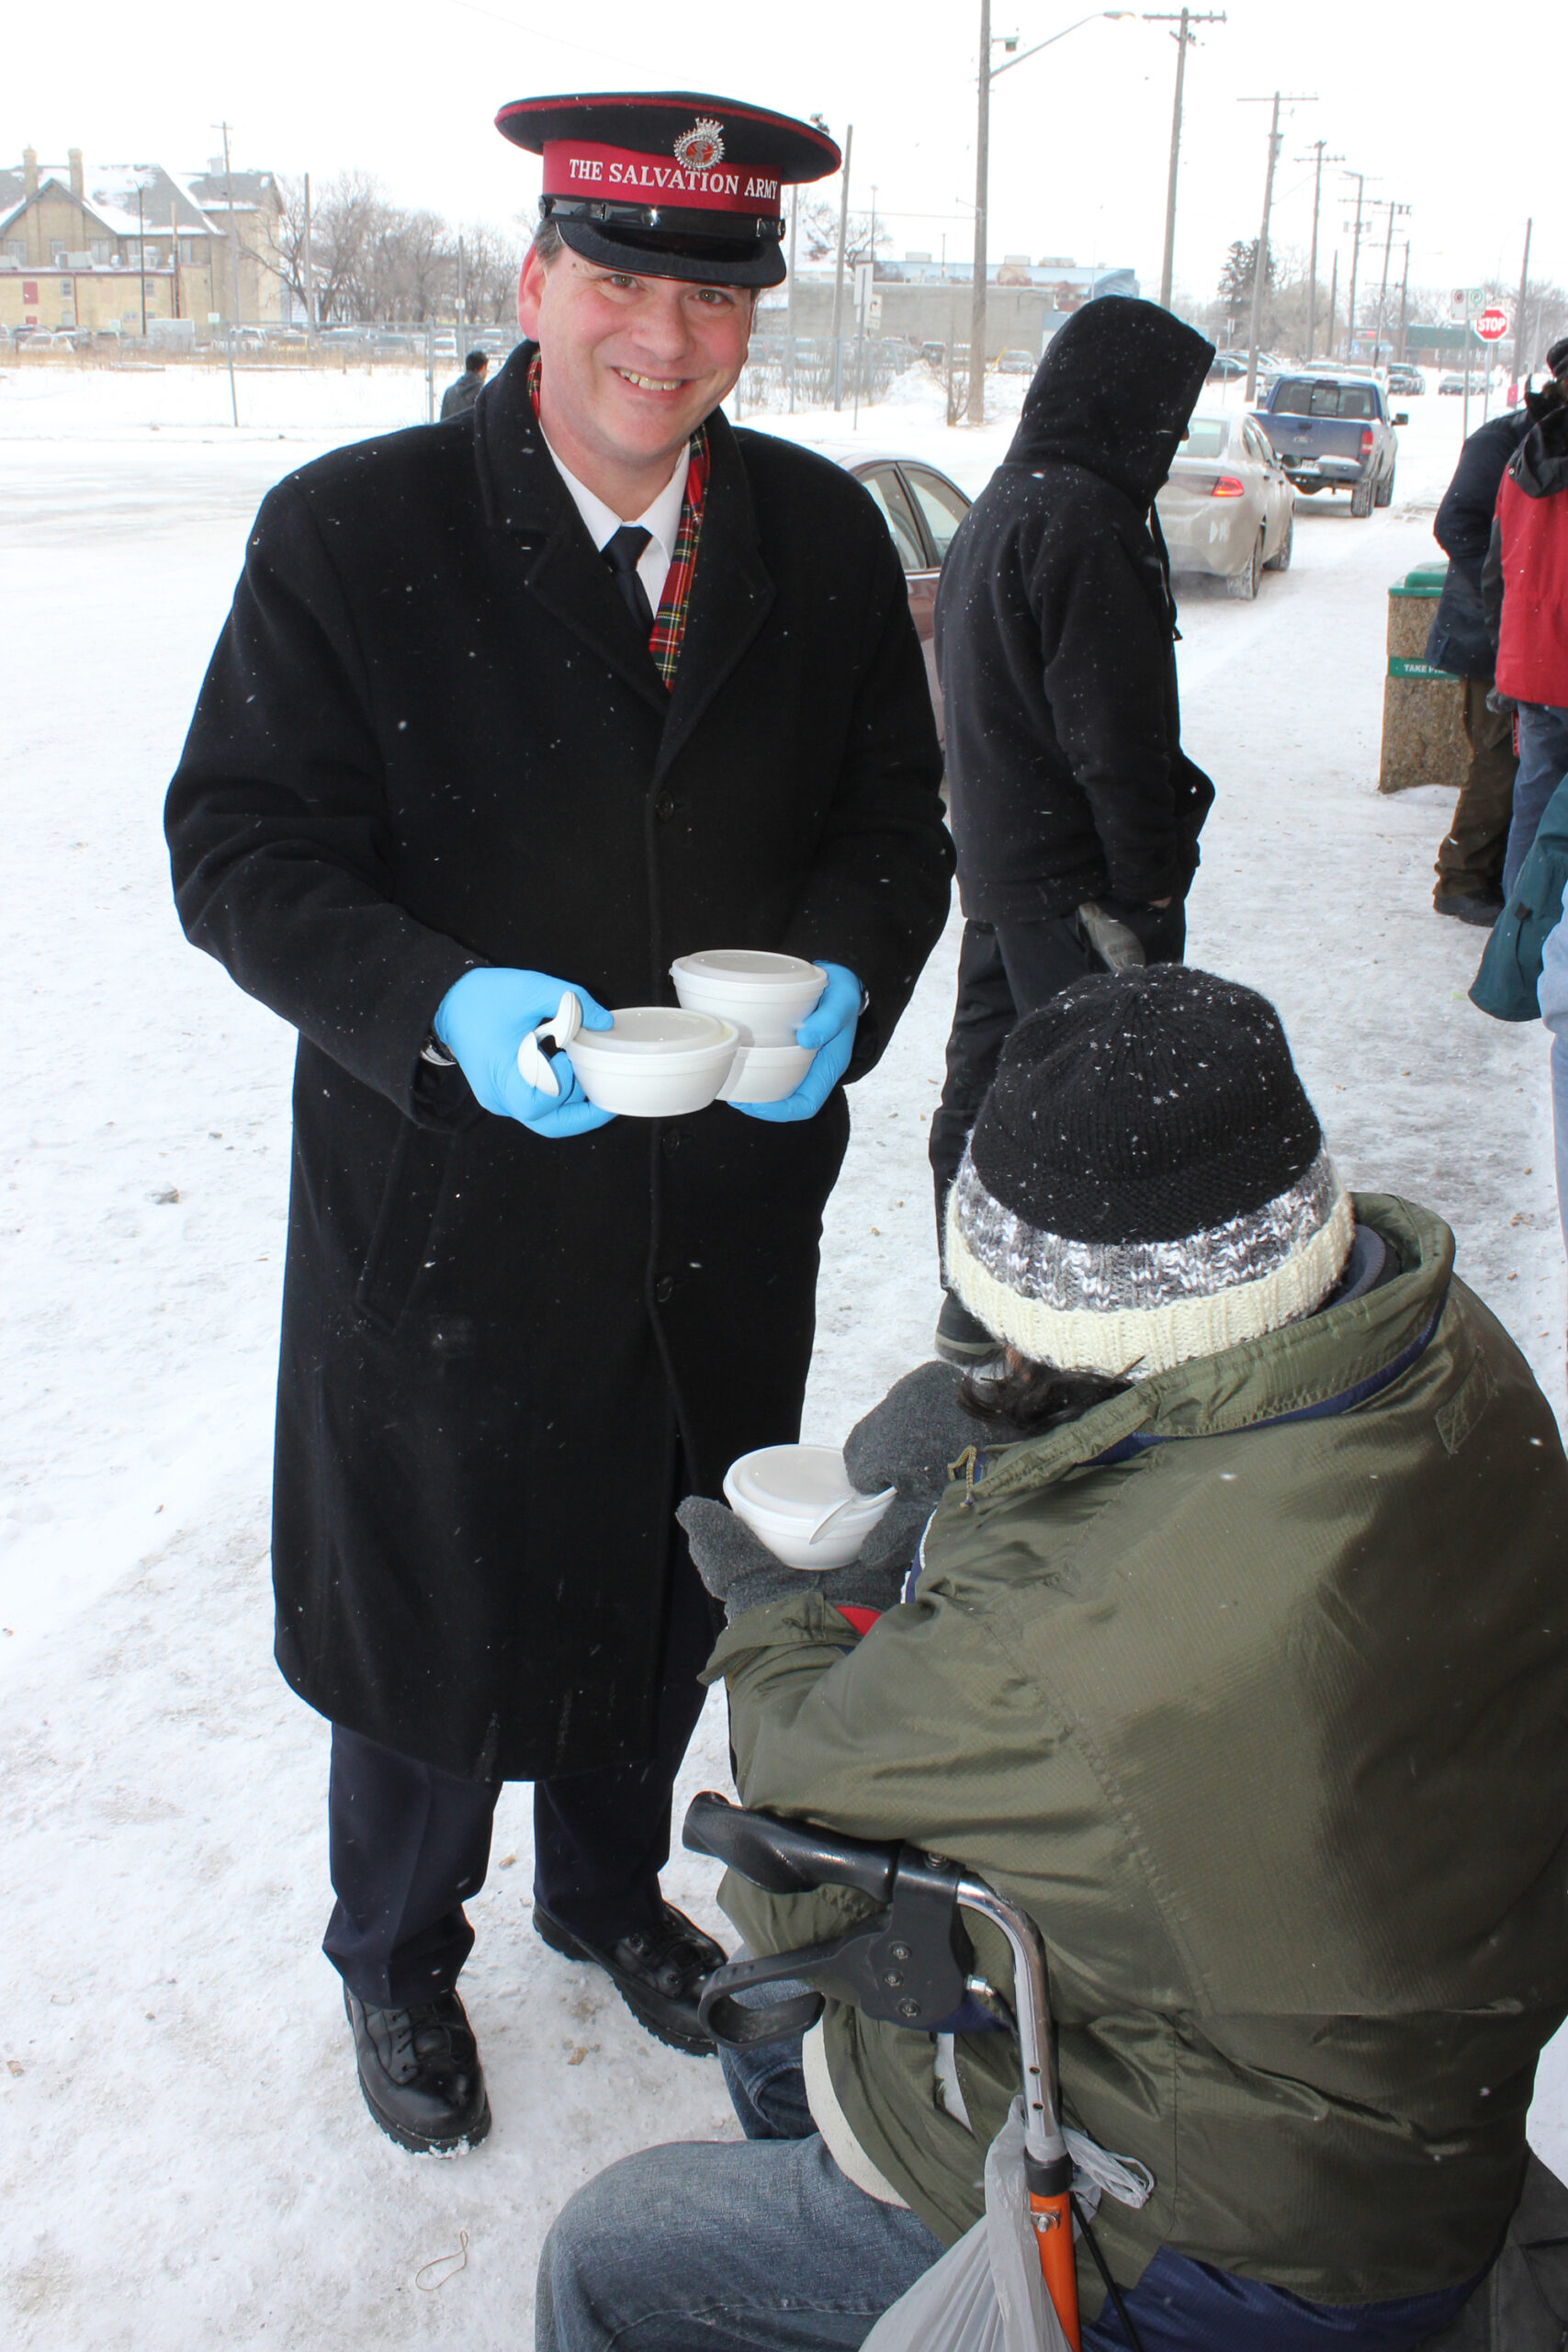 Capt. Rod Bungay offers a bowl of soup to a man in need